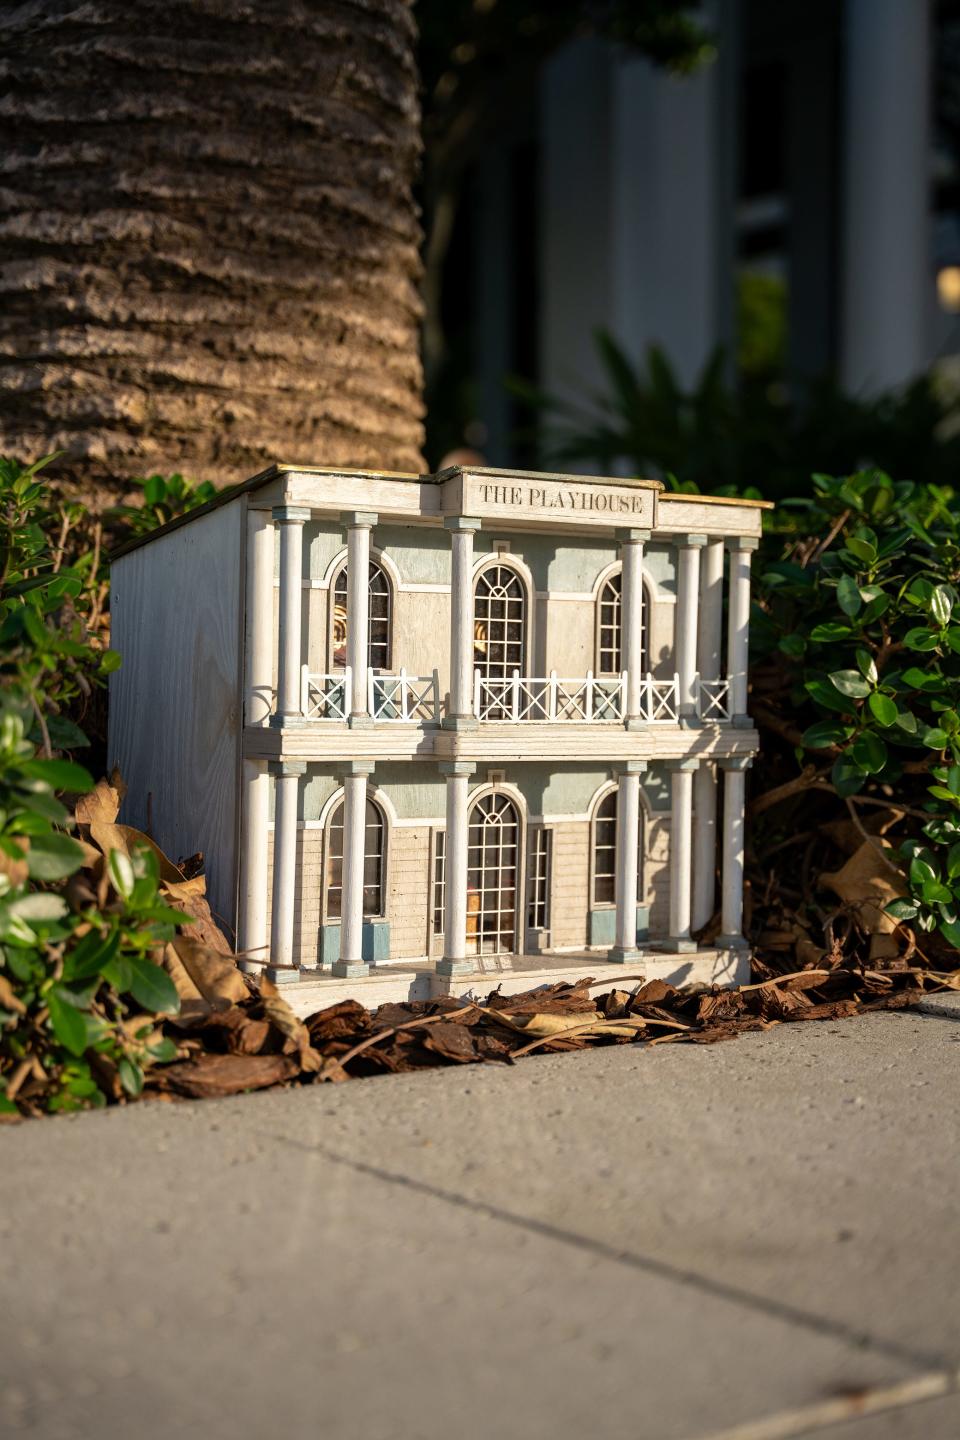 Guests of the Royal Poinciana Plaza will have to be sharp-eyed to spot the tiny AnonyMouse installations at the shopping and dining destination.